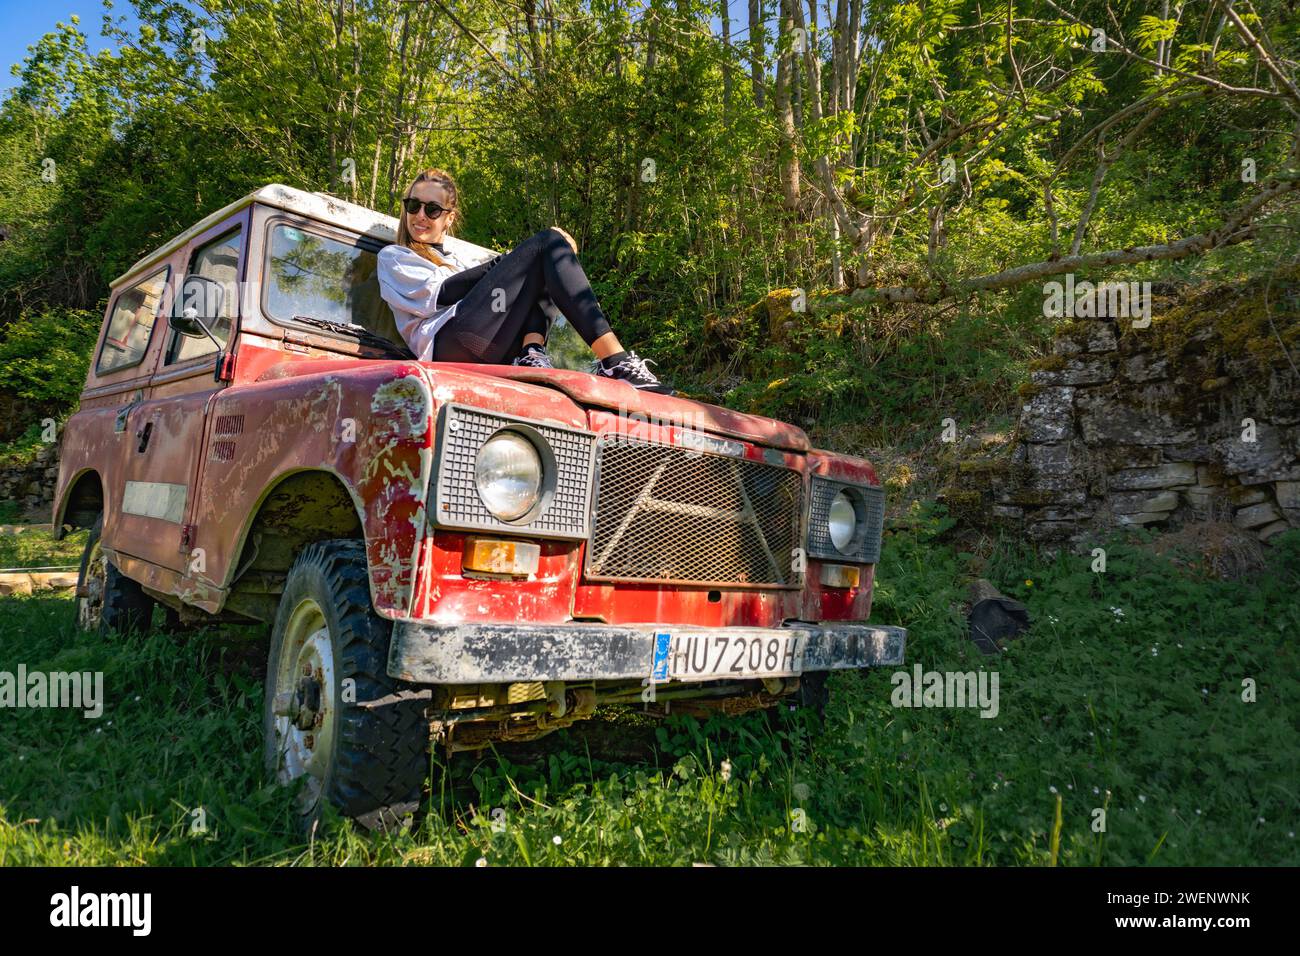 Woman sitting on the hood of a vintage red off-road parked in woods, sunbathing with sunglasses while smiling Stock Photo